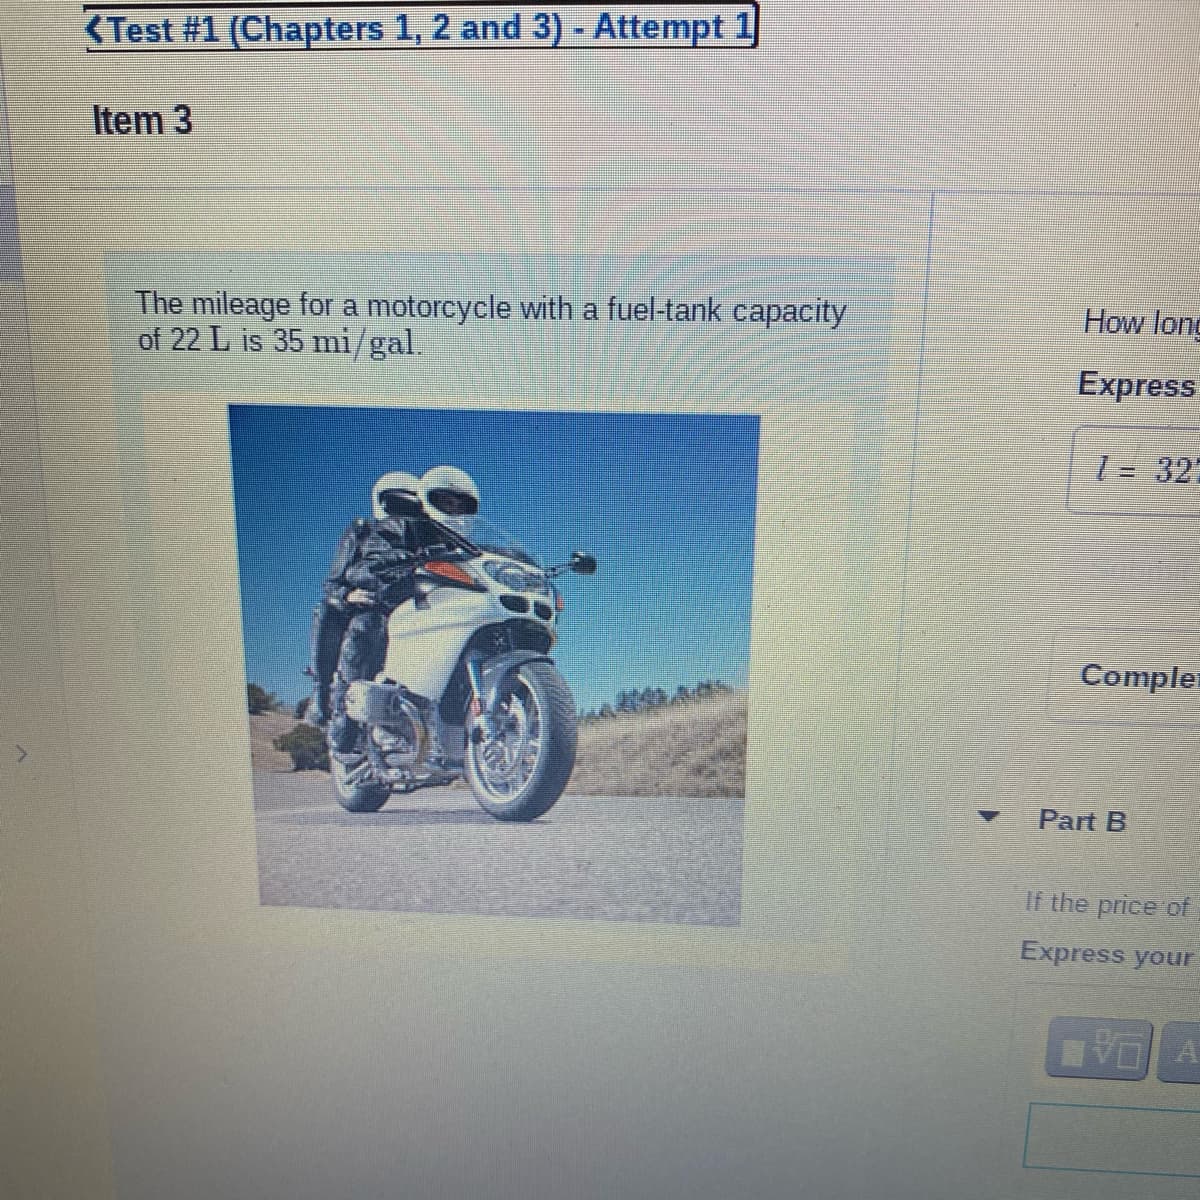 <Test #1 (Chapters 1, 2 and 3) - Attempt 1
Item 3
The mileage for a motorcycle with a fuel-tank capacity
of 22 L is 35 mi/gal.
How long
Express
l = 32;
Compler
Part B
If the price of
Express your
